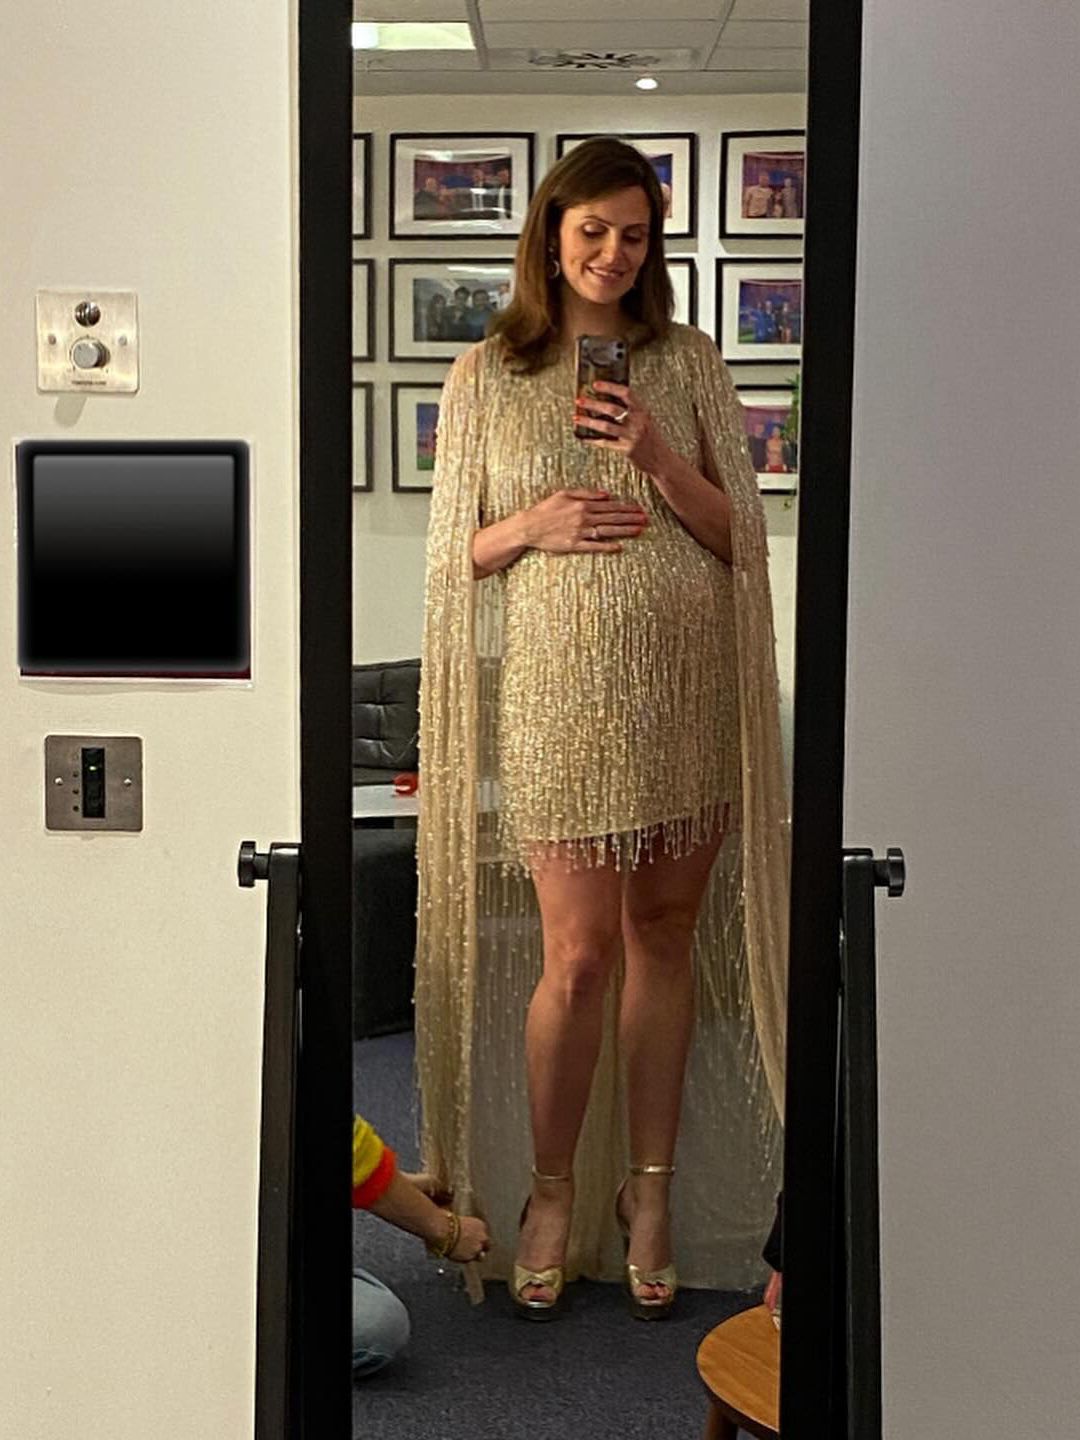 Ellie Taylor in the dress she intended to wear to the Royal Variety Show, prior to her baby's early arrival